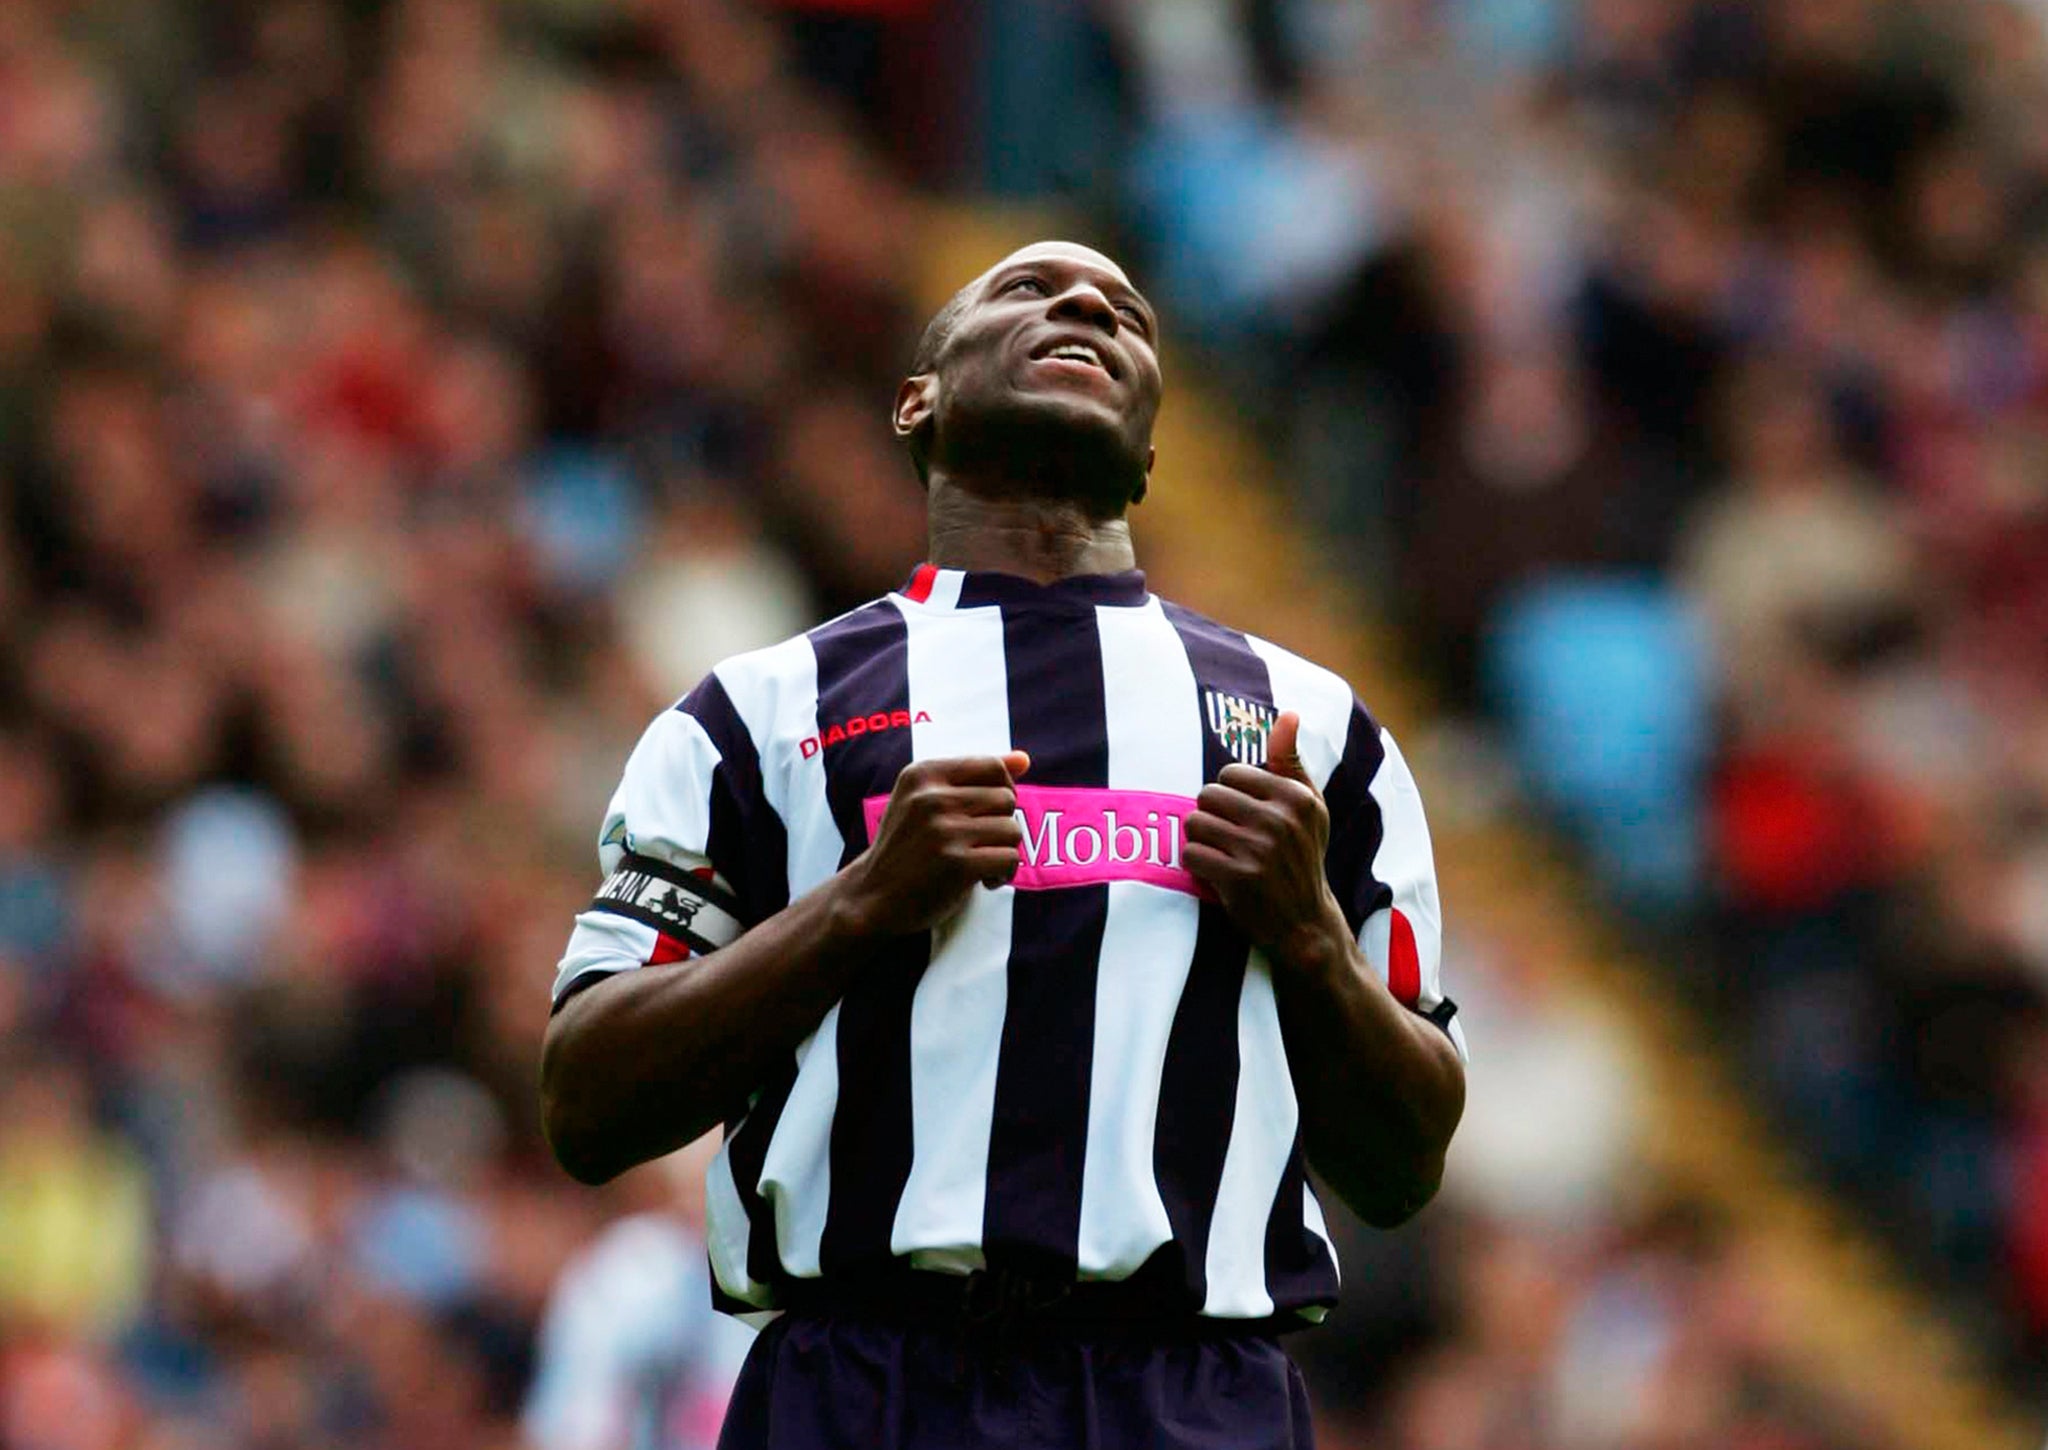 Kevin Campbell of West Bromwich Albion during the Barclays Premiership match between Aston Villa and West Bromwich Albion at Villa Park on April 10, 2005